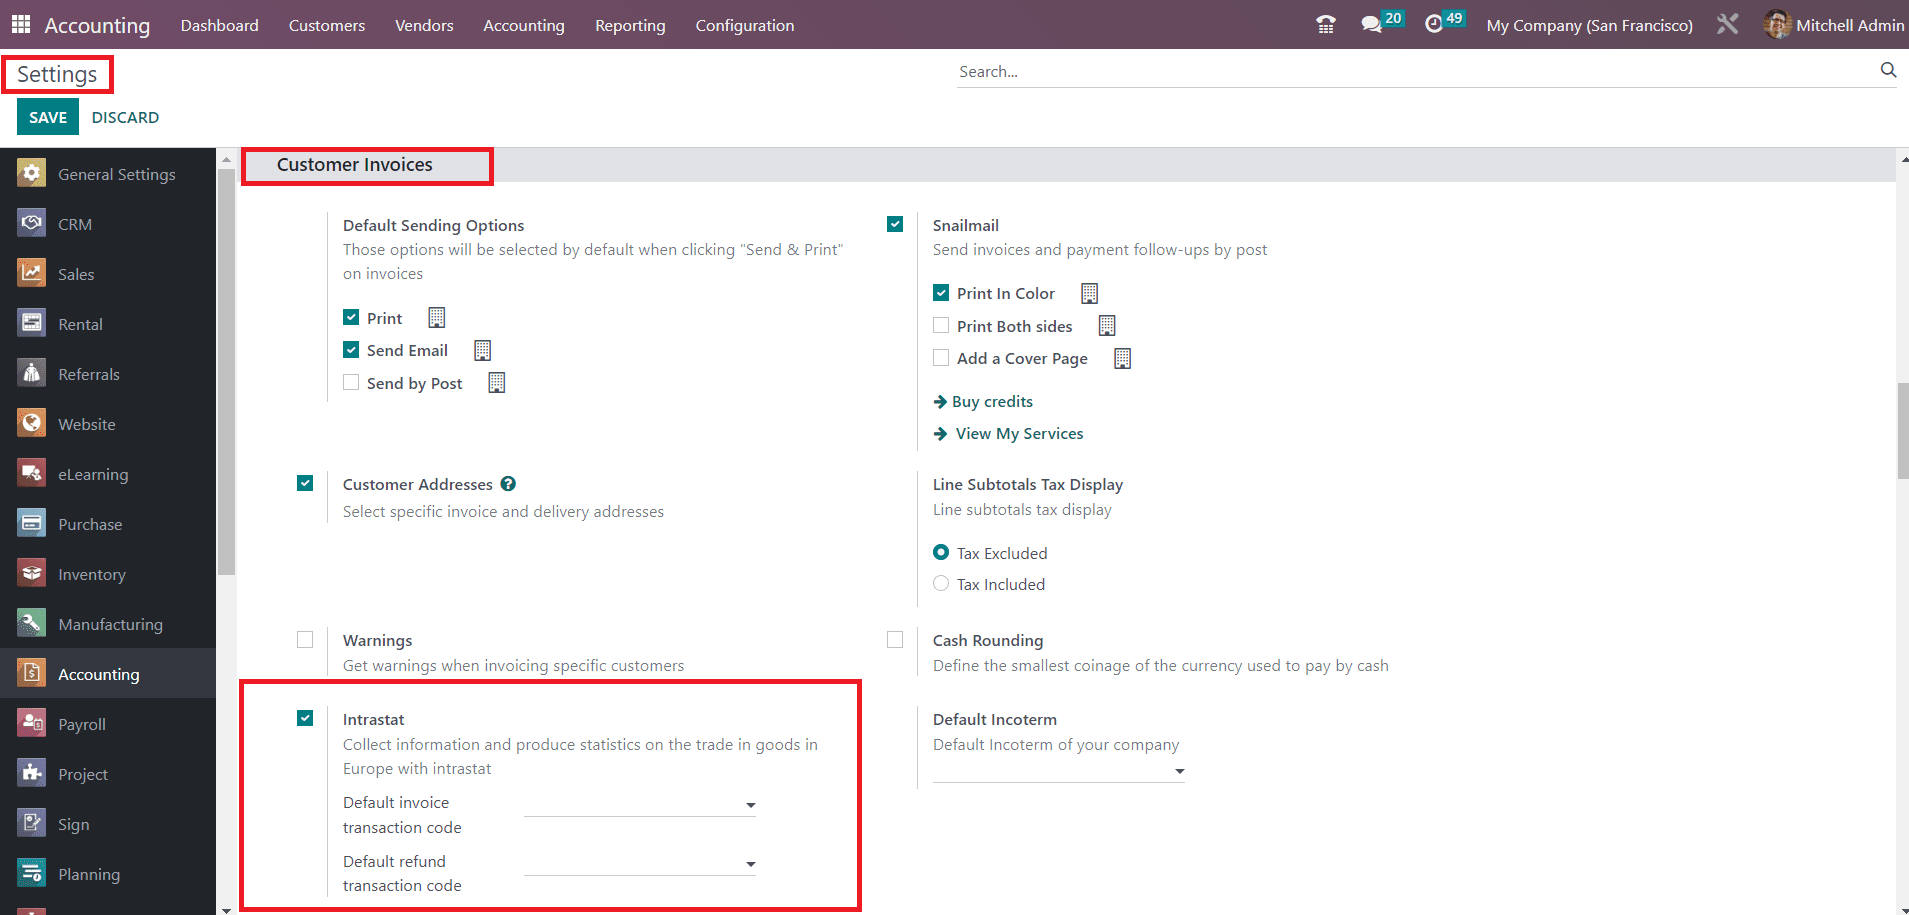 how-to-manage-intra-community-trade-using-intrastat-in-odoo-16-1-cybrosys